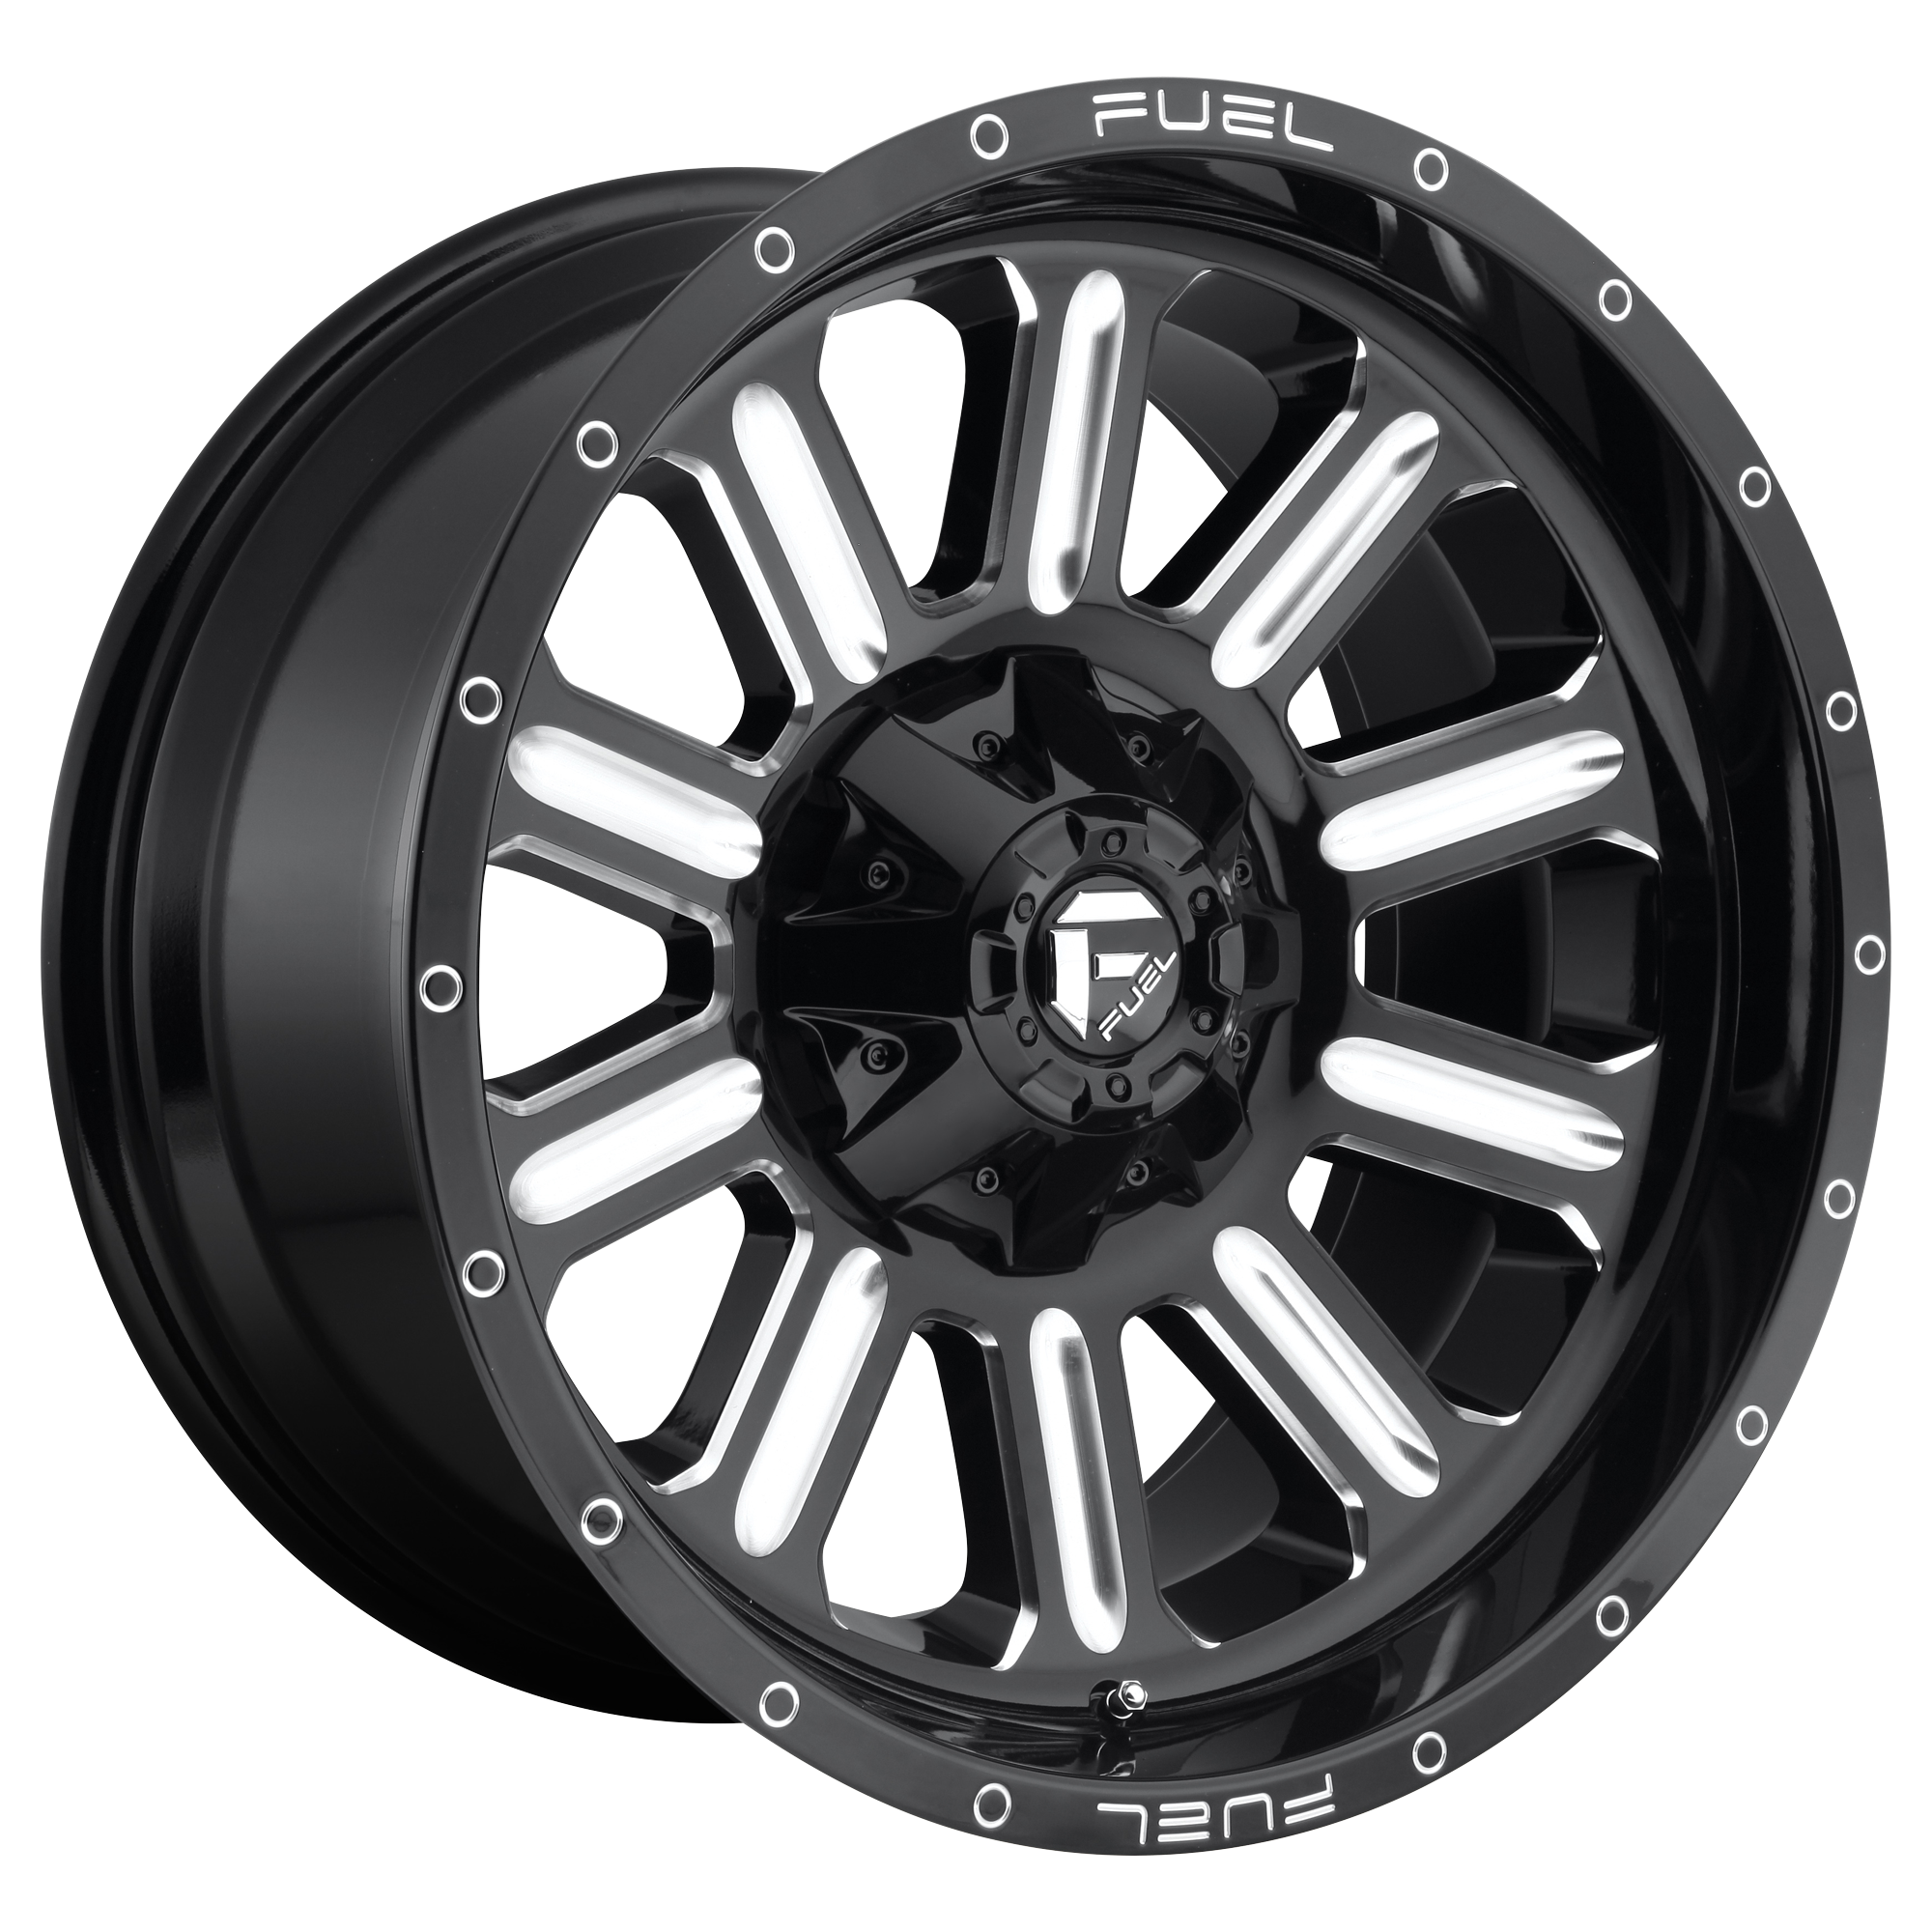 HARDLINE 18x9 5x114.30/5x127.00 GLOSS BLACK MILLED (1 mm) - Tires and Engine Performance